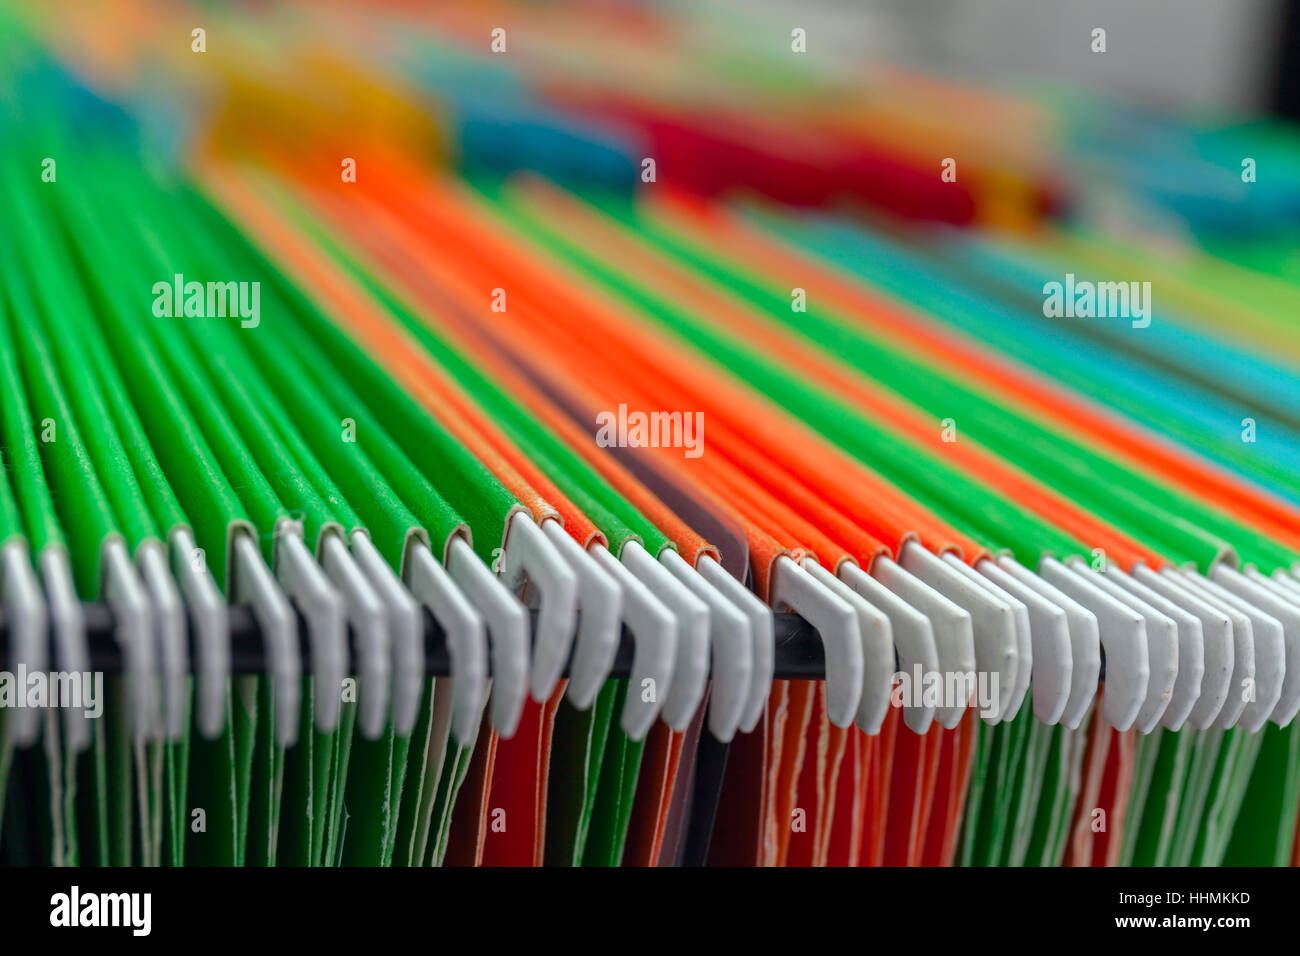 Abstract background colorful hanging file folders in drawer. Stock Photo